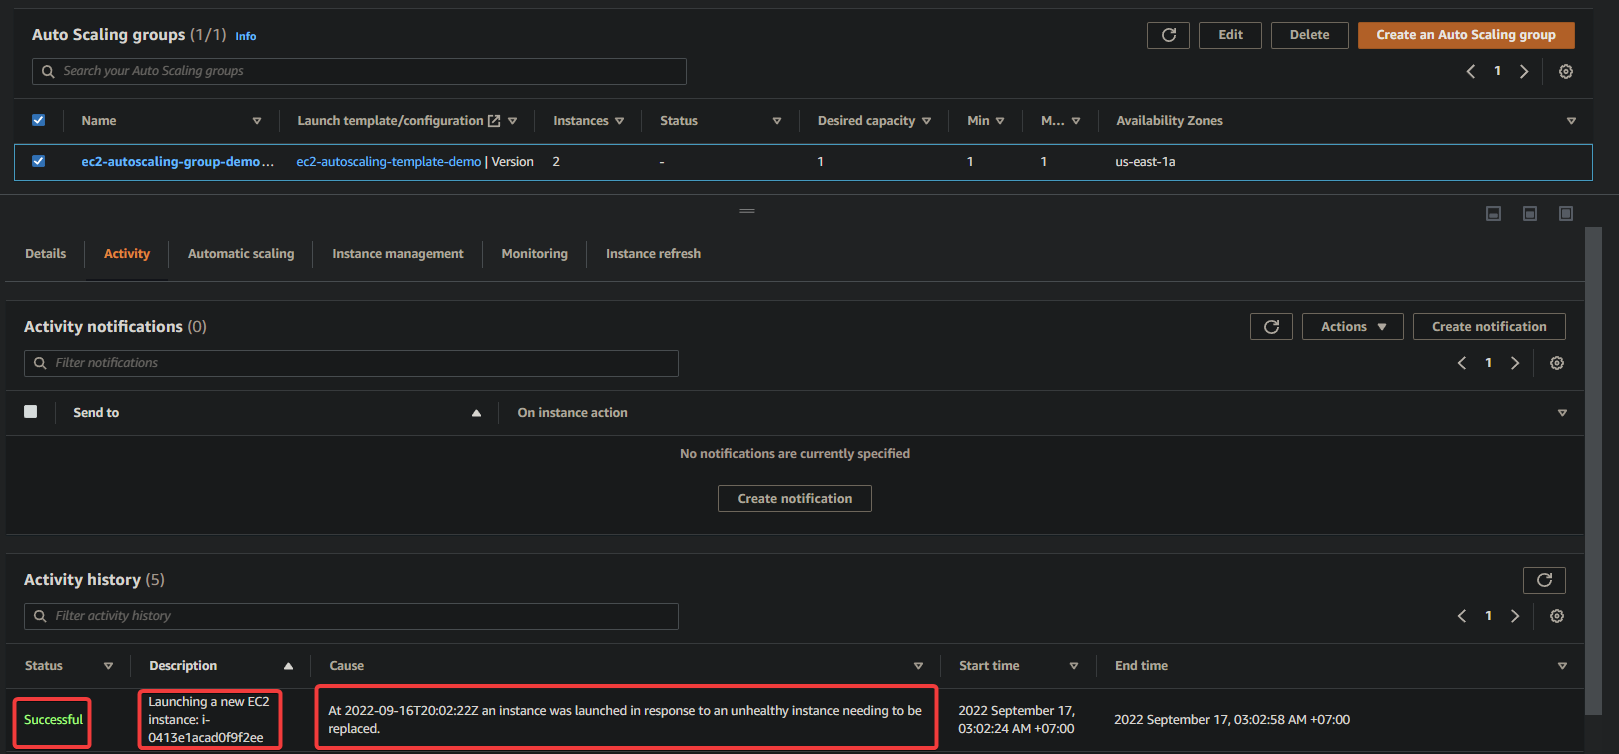 Checking a new EC2 instance is launched automatically